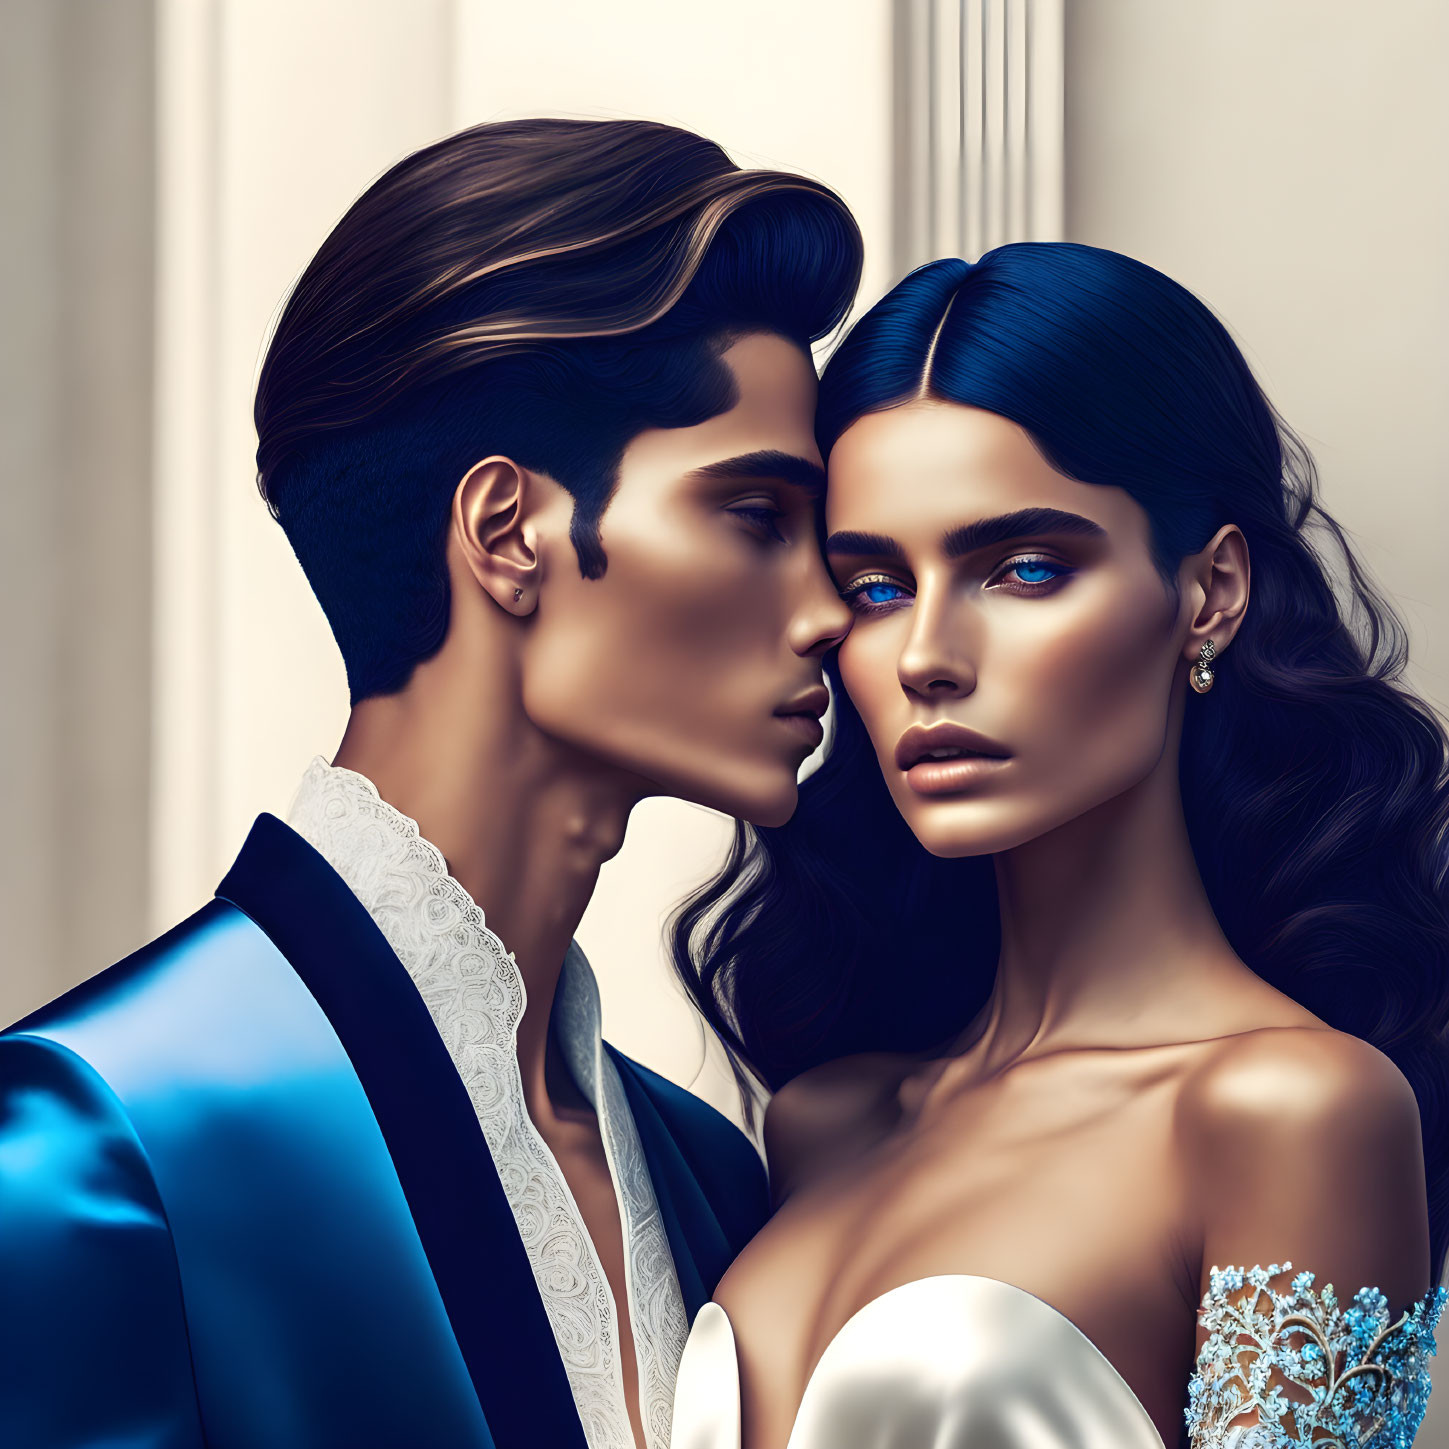 Stylish Couple in Tuxedo and Off-Shoulder Dress with Striking Blue Eyes